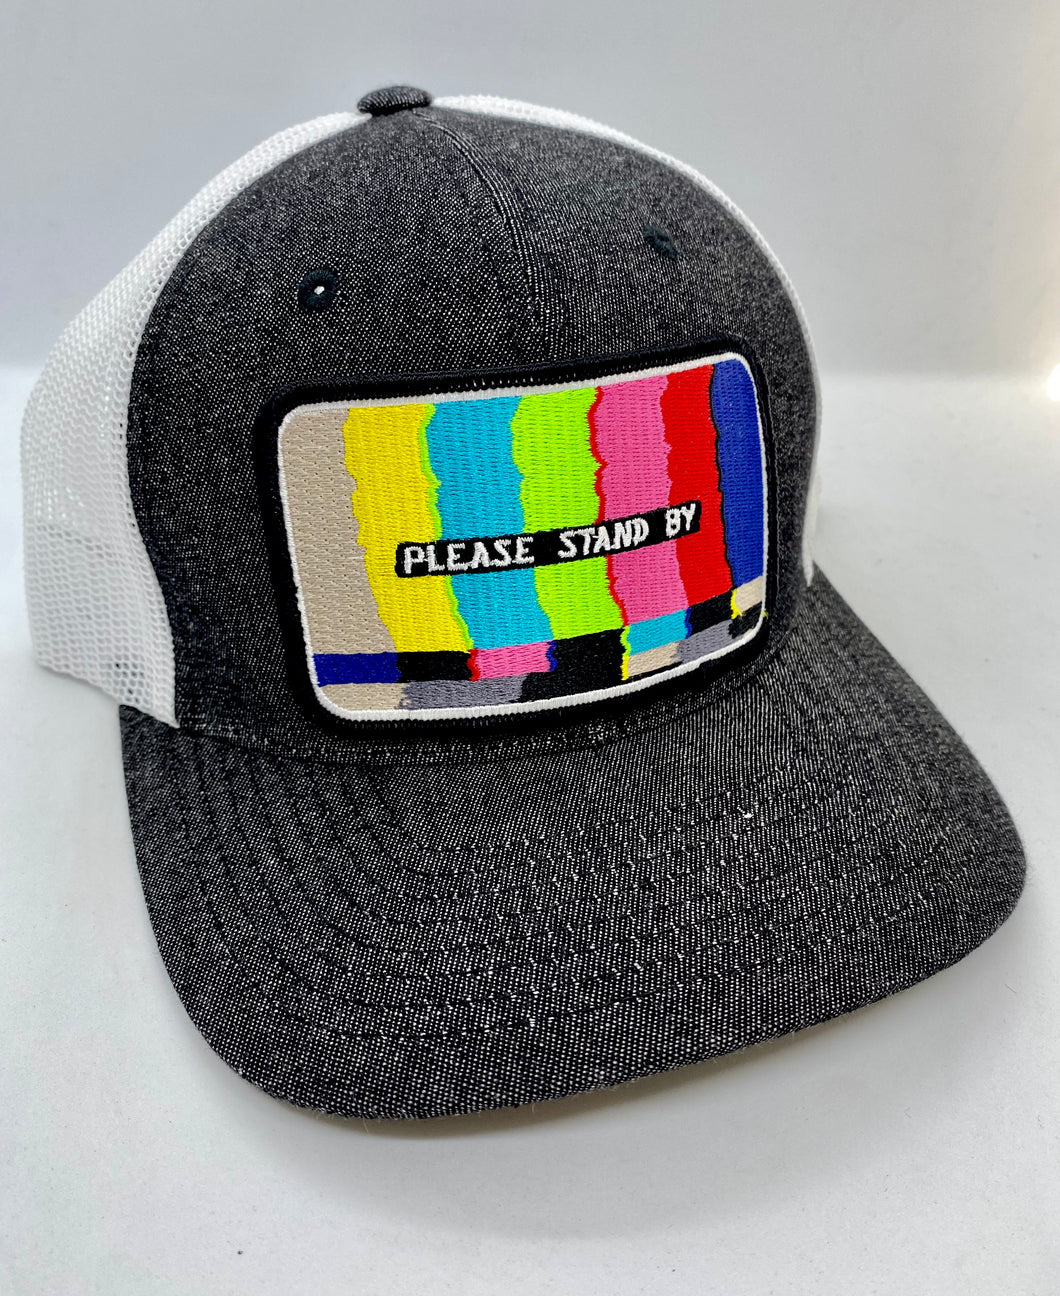 Please Stand By pocket patch hat